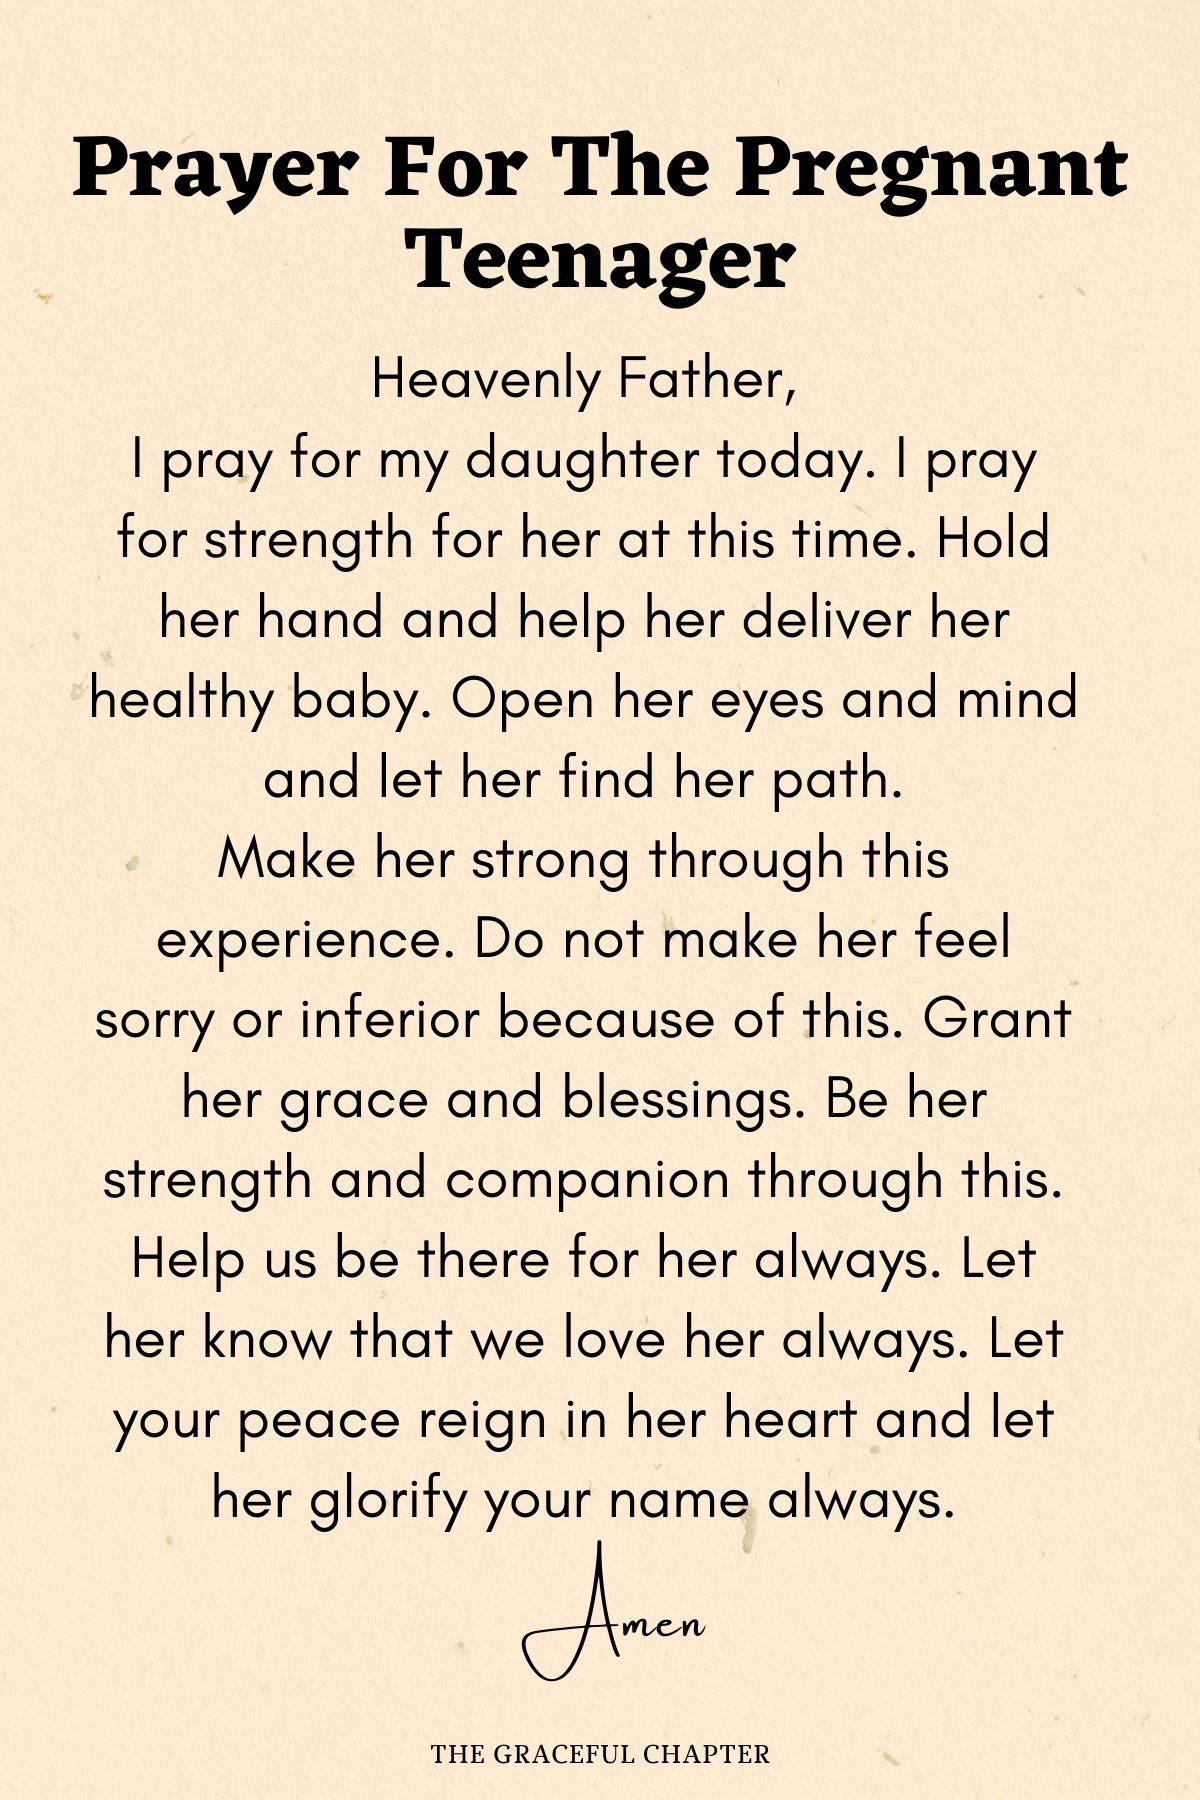 Prayer for the pregnant teenager